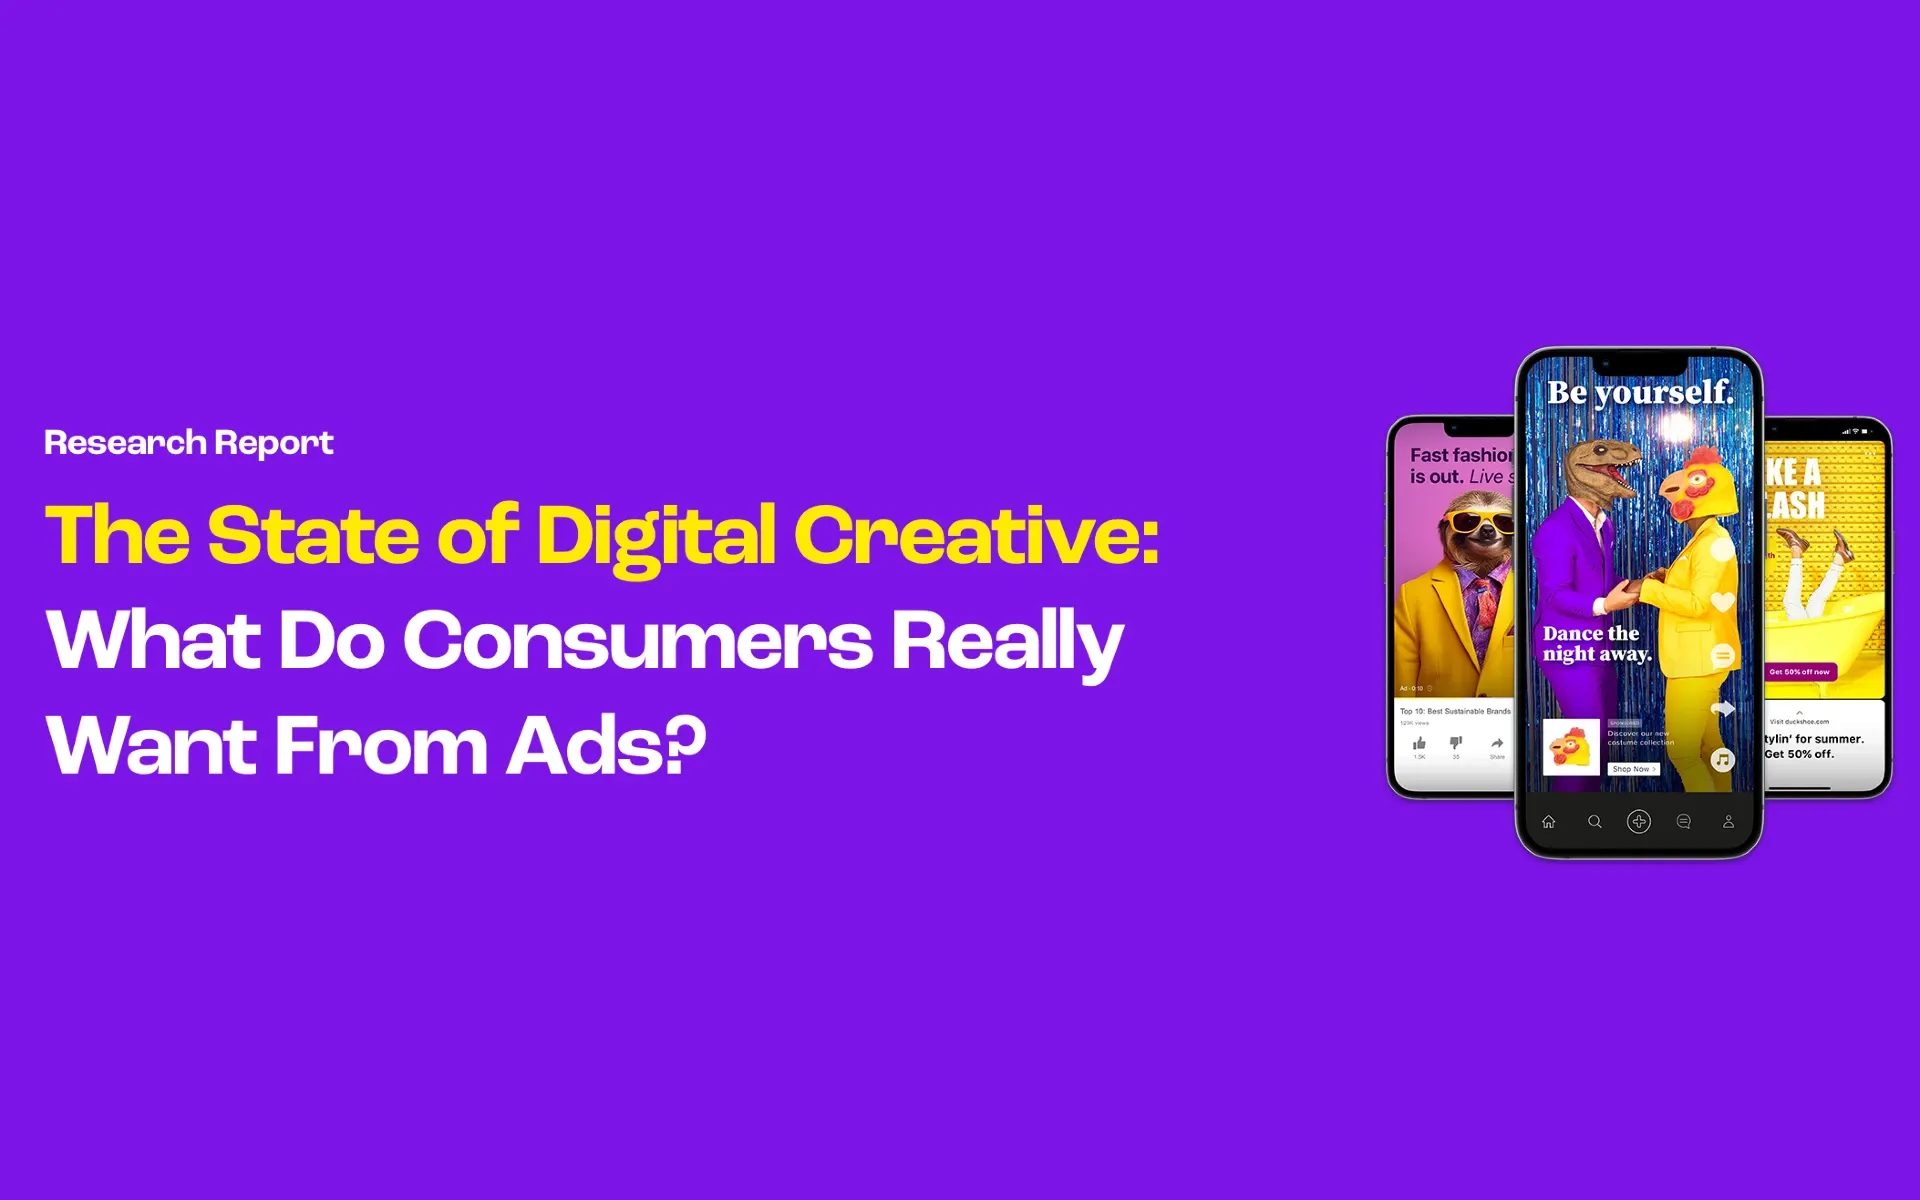 The State of Digital Creative